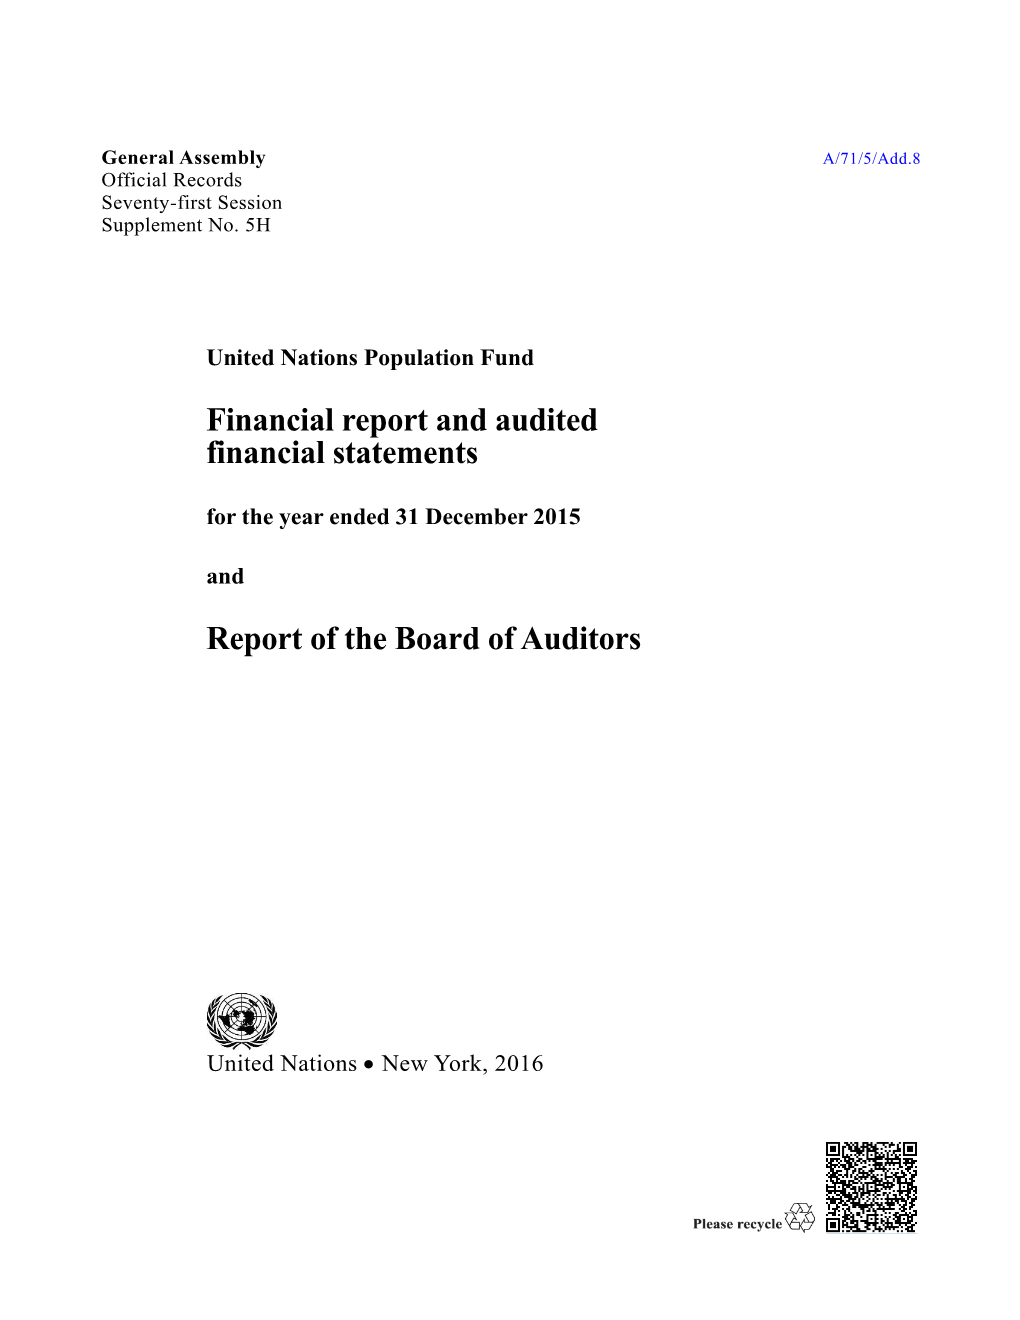 Financial Report and Audited Financial Statements